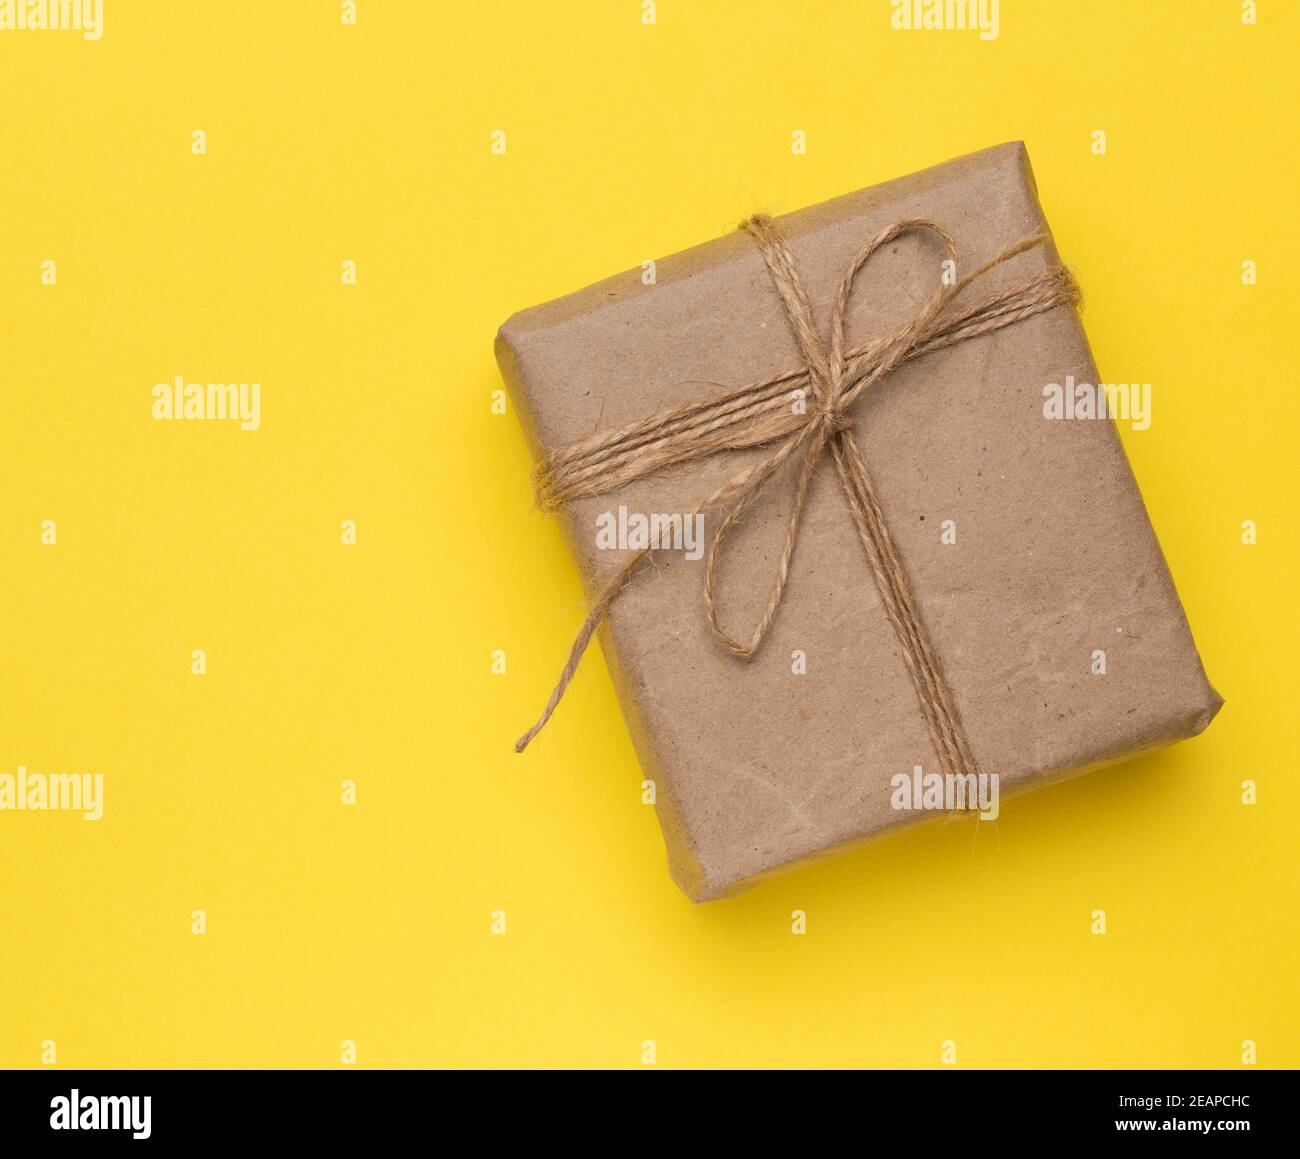 square box with a gift wrapped in brown paper and tied with a brown ro Stock Photo